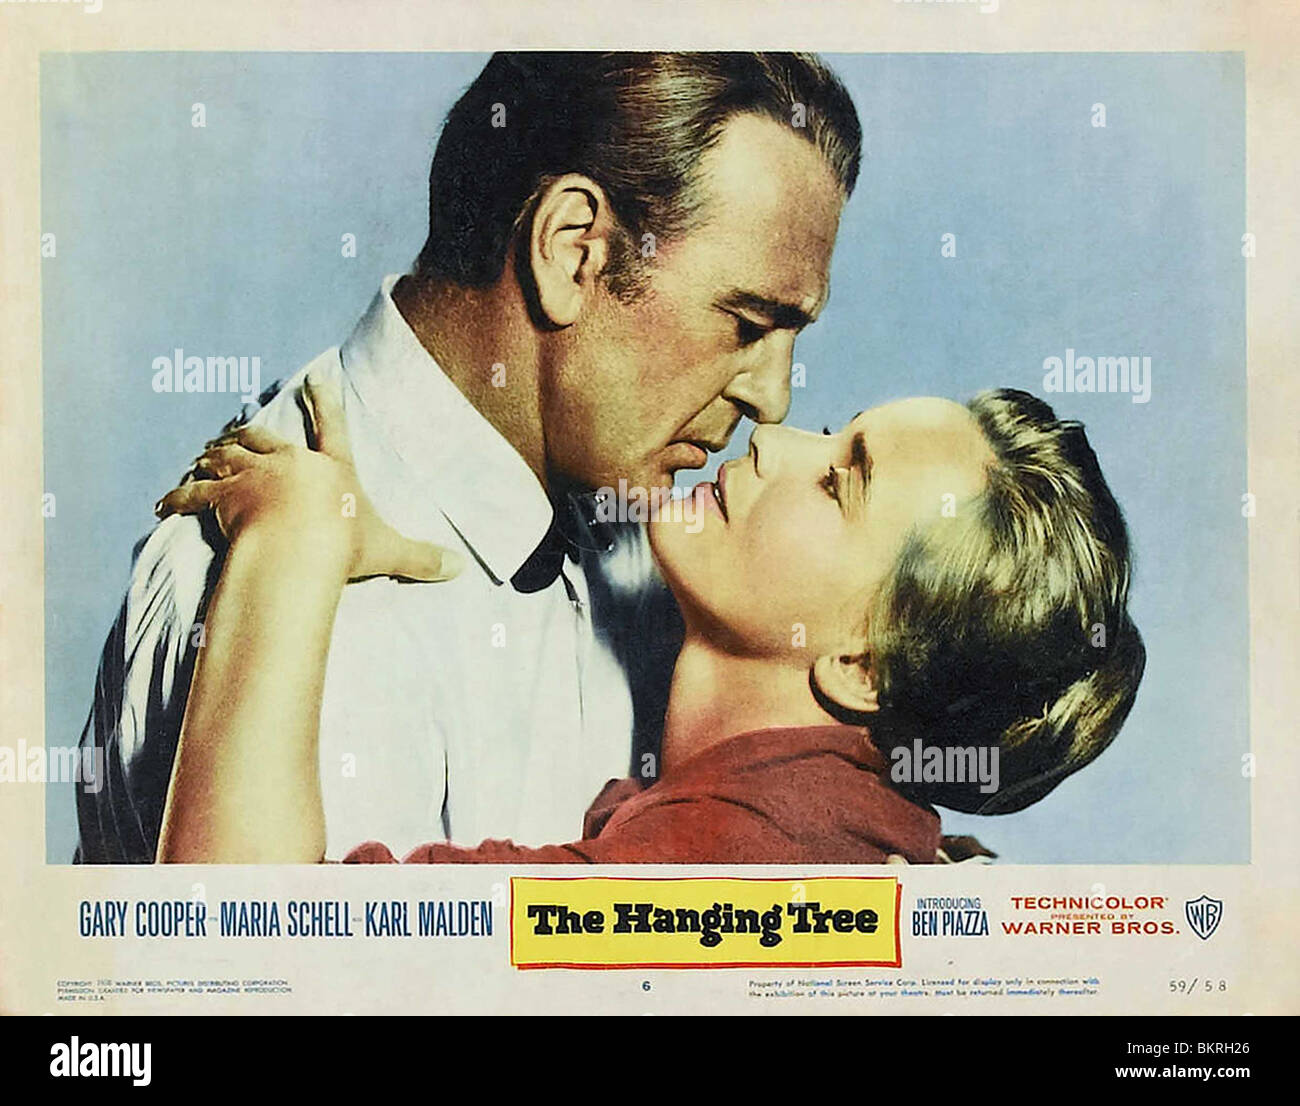 THE HANGING TREE (1959) GARY COOPER, MARIA SCHELL DELMER DAVES (DIR) 001 Stock Photo